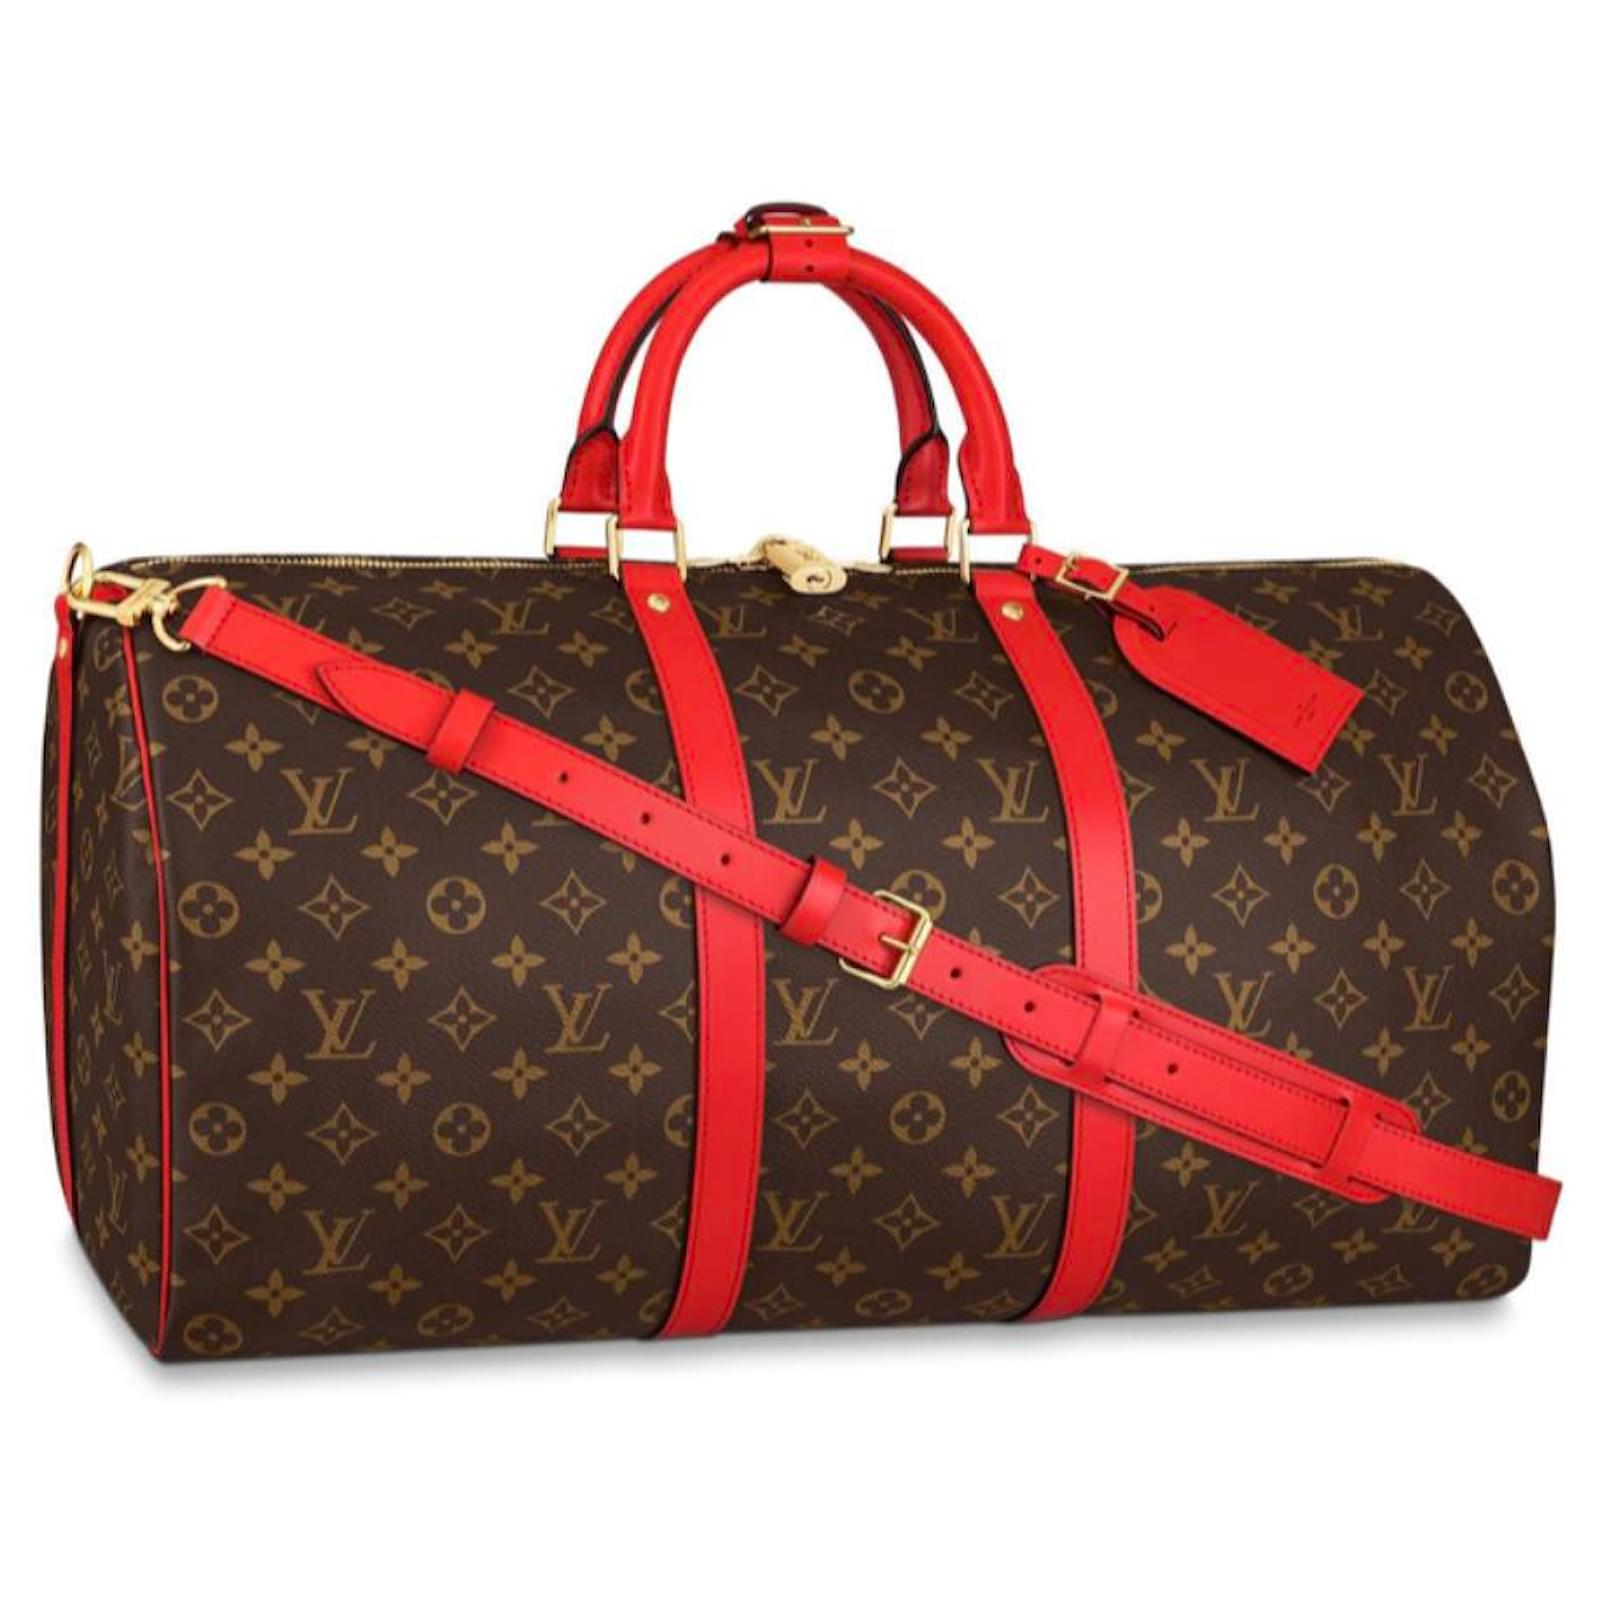 Limited Edition!! BRANDNEW Louis Vuitton KEEPALL XS with dustbag